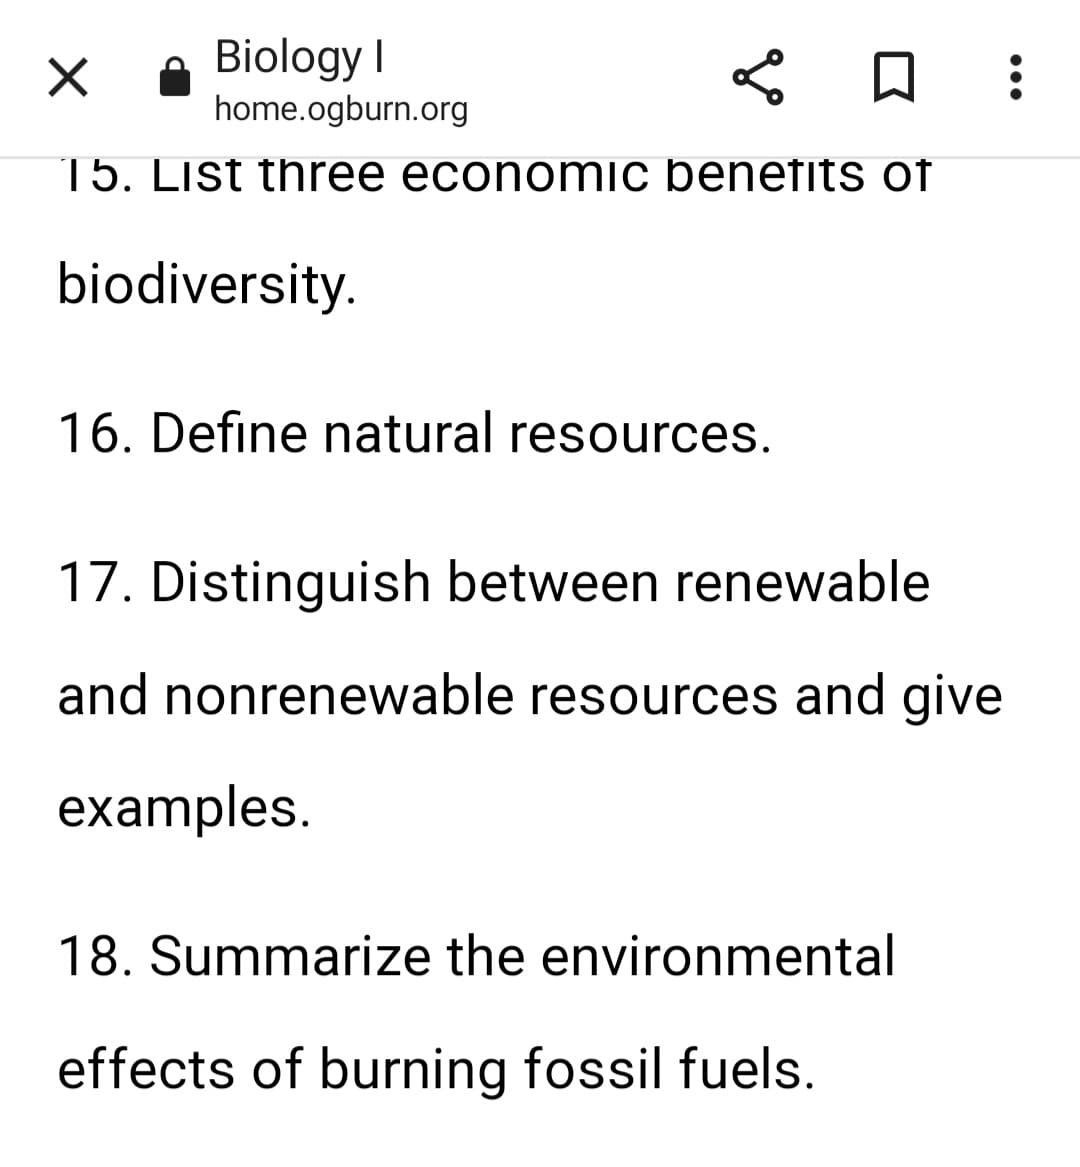 X
Biology I
home.ogburn.org
15. List three economic benefits of
biodiversity.
< 0 :
16. Define natural resources.
17. Distinguish between renewable
and nonrenewable resources and give
examples.
18. Summarize the environmental
effects of burning fossil fuels.